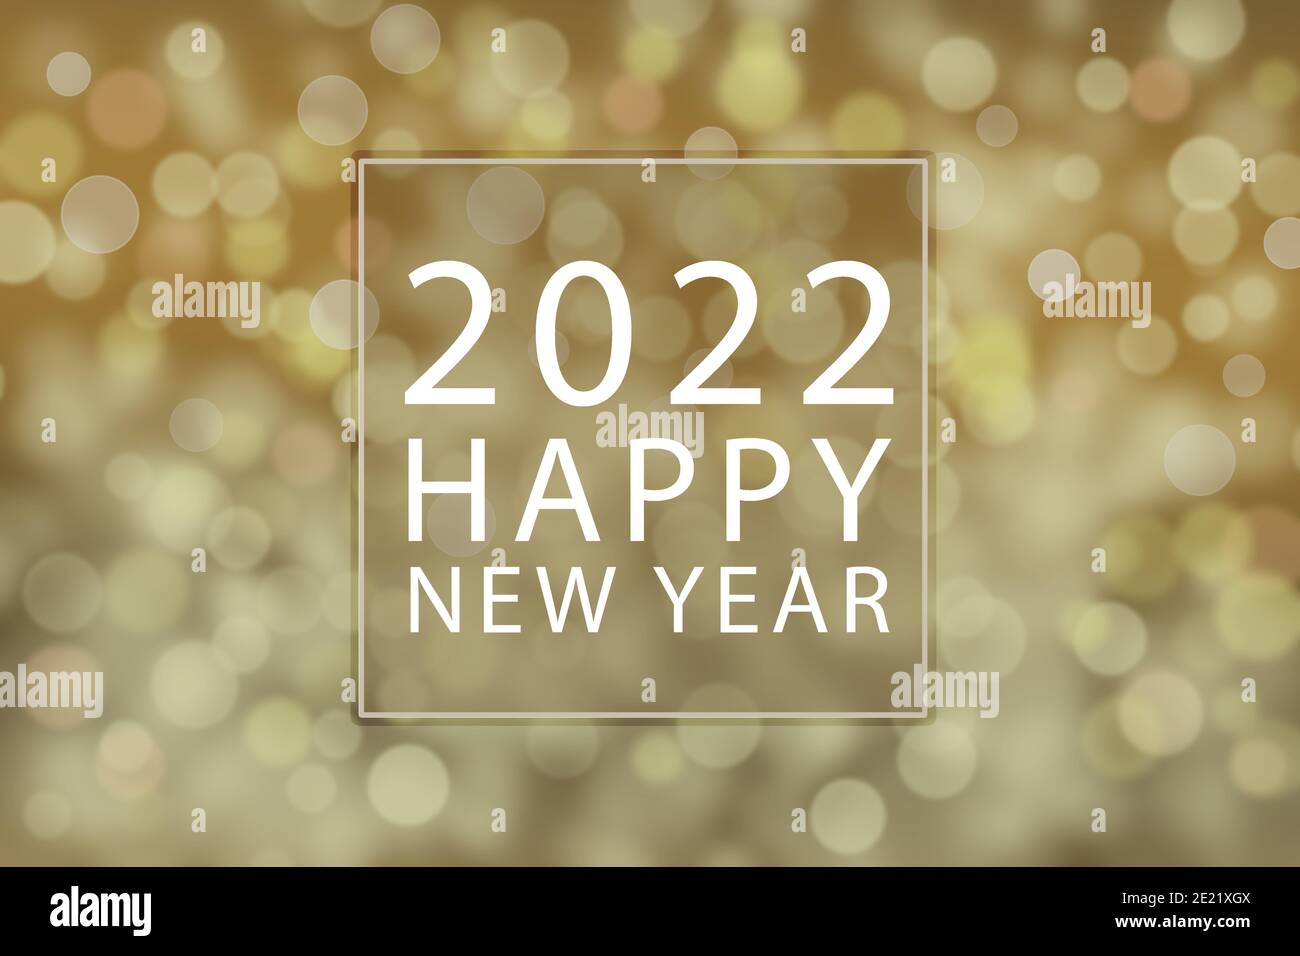 Happy New Year 2022 text gold magic background. Stock Photo